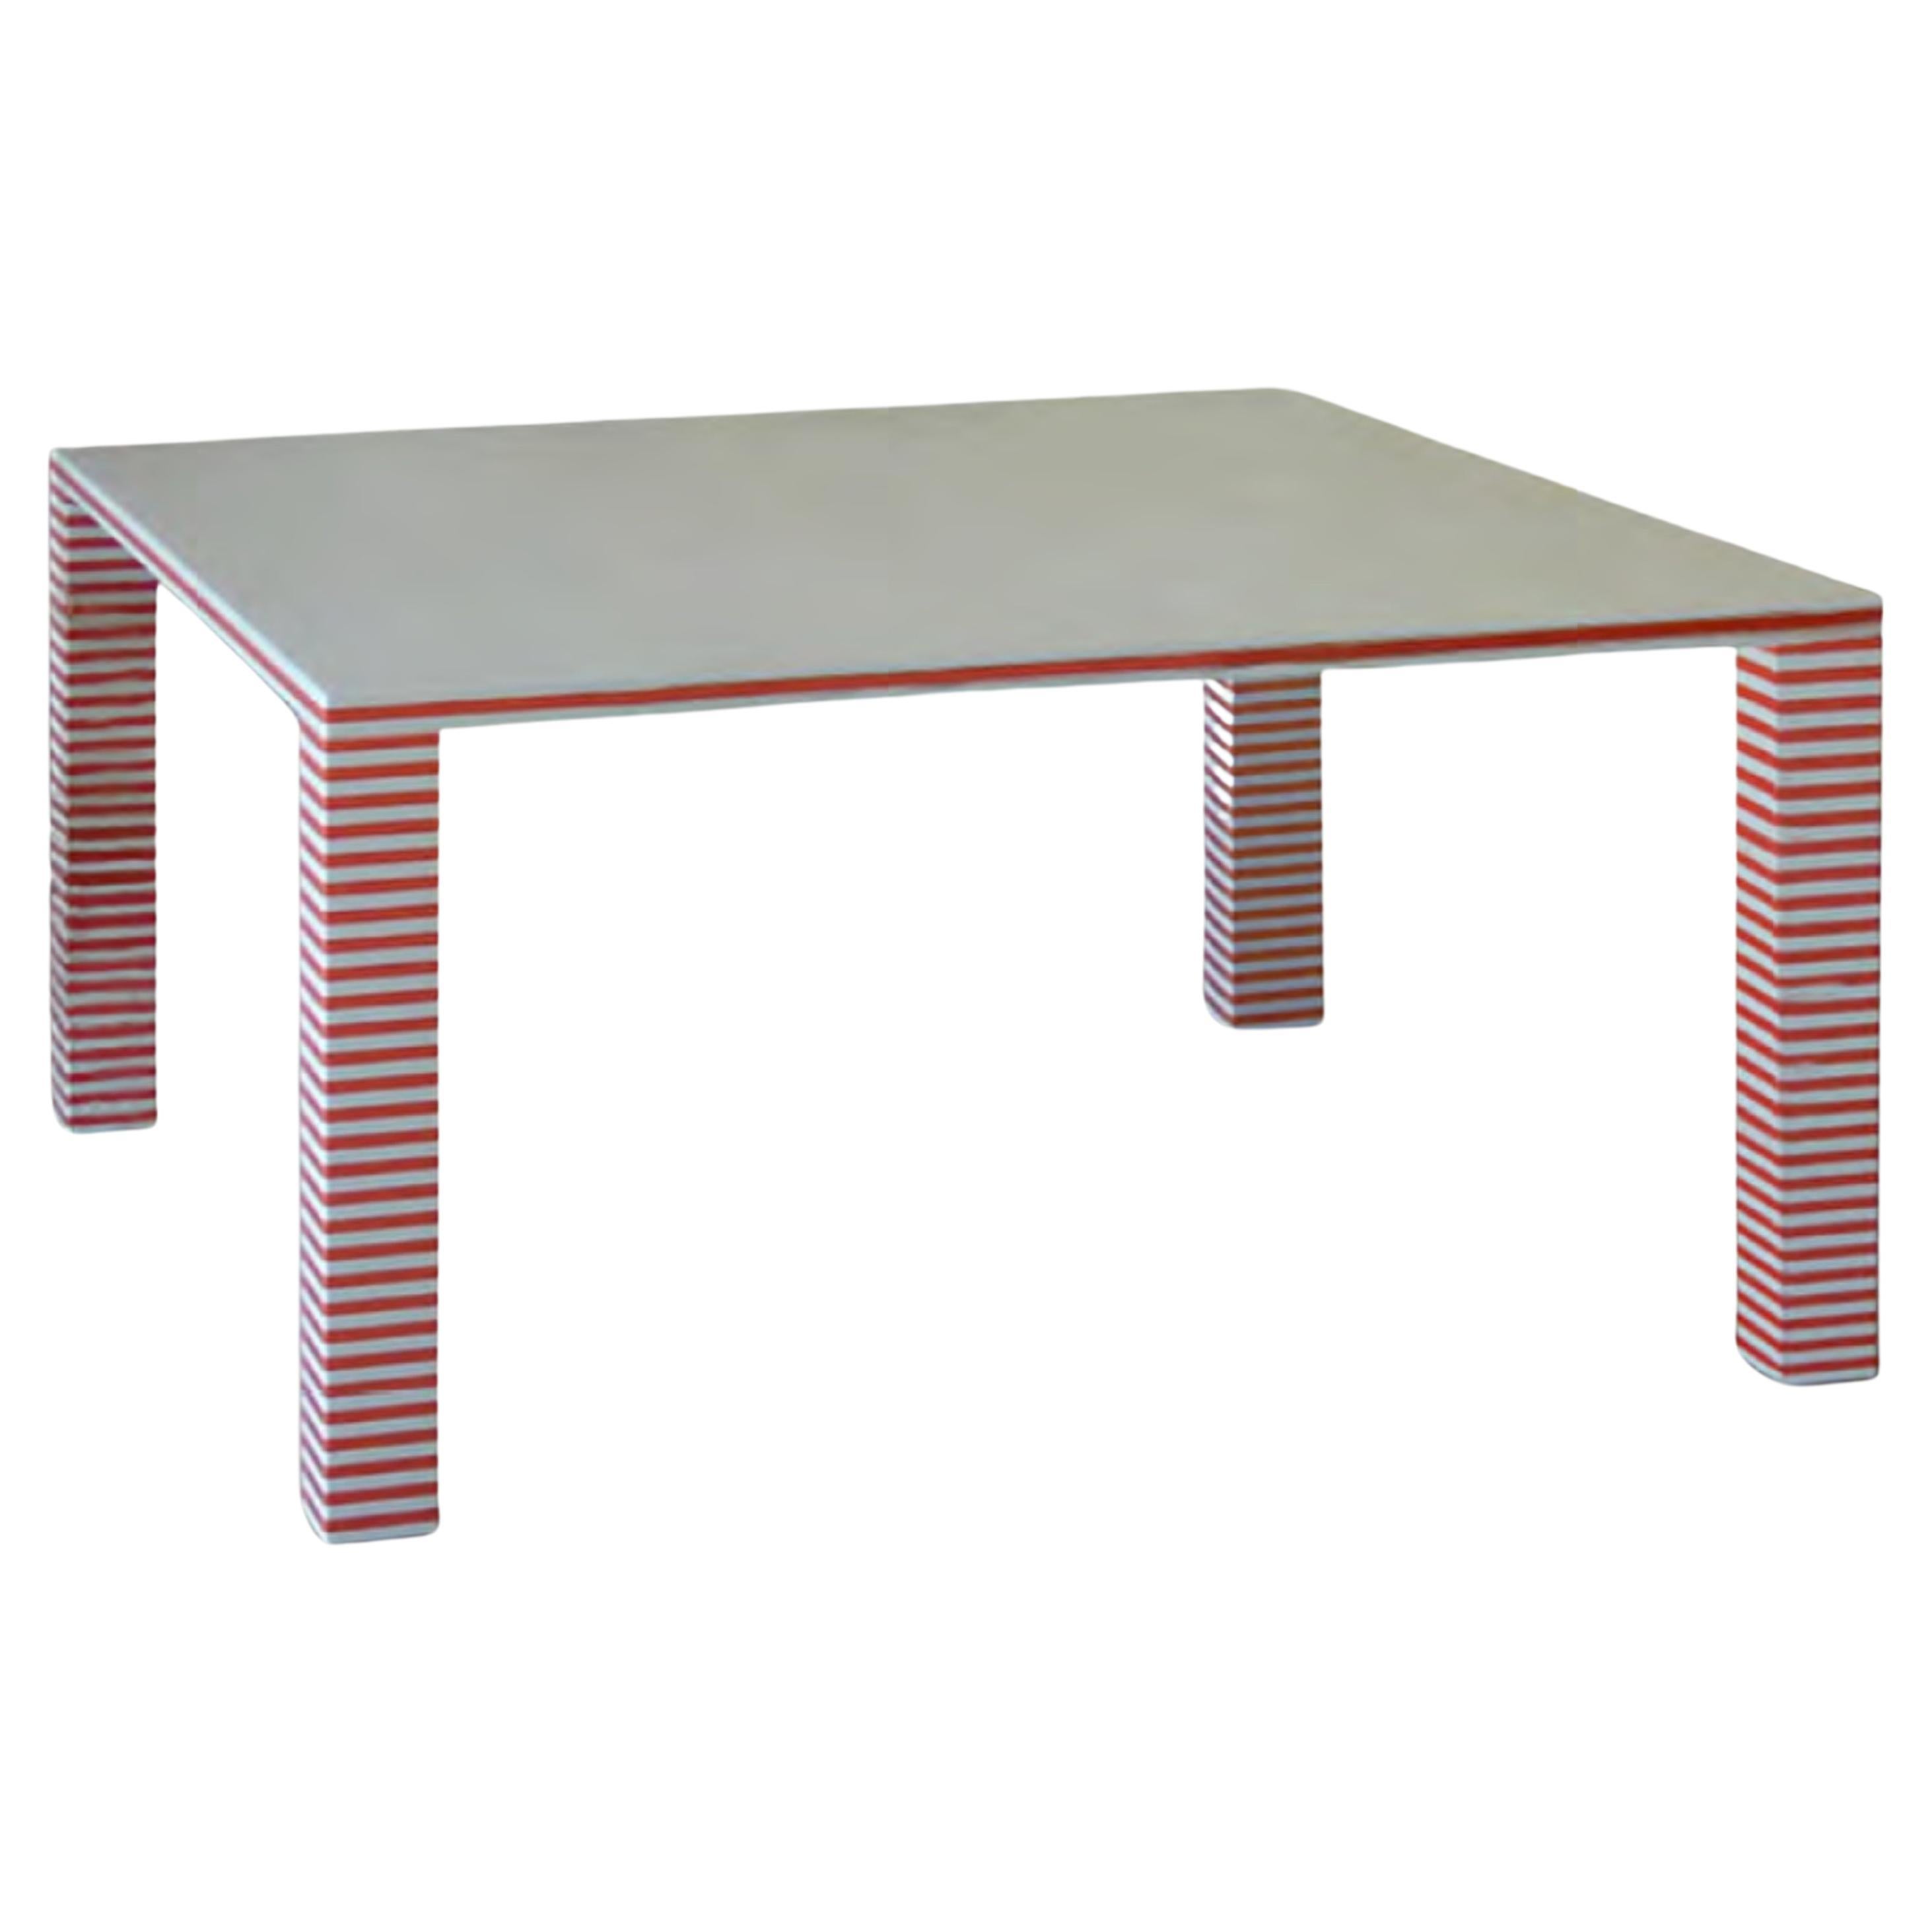 CF T22 Dinner Table by Caturegli Formica